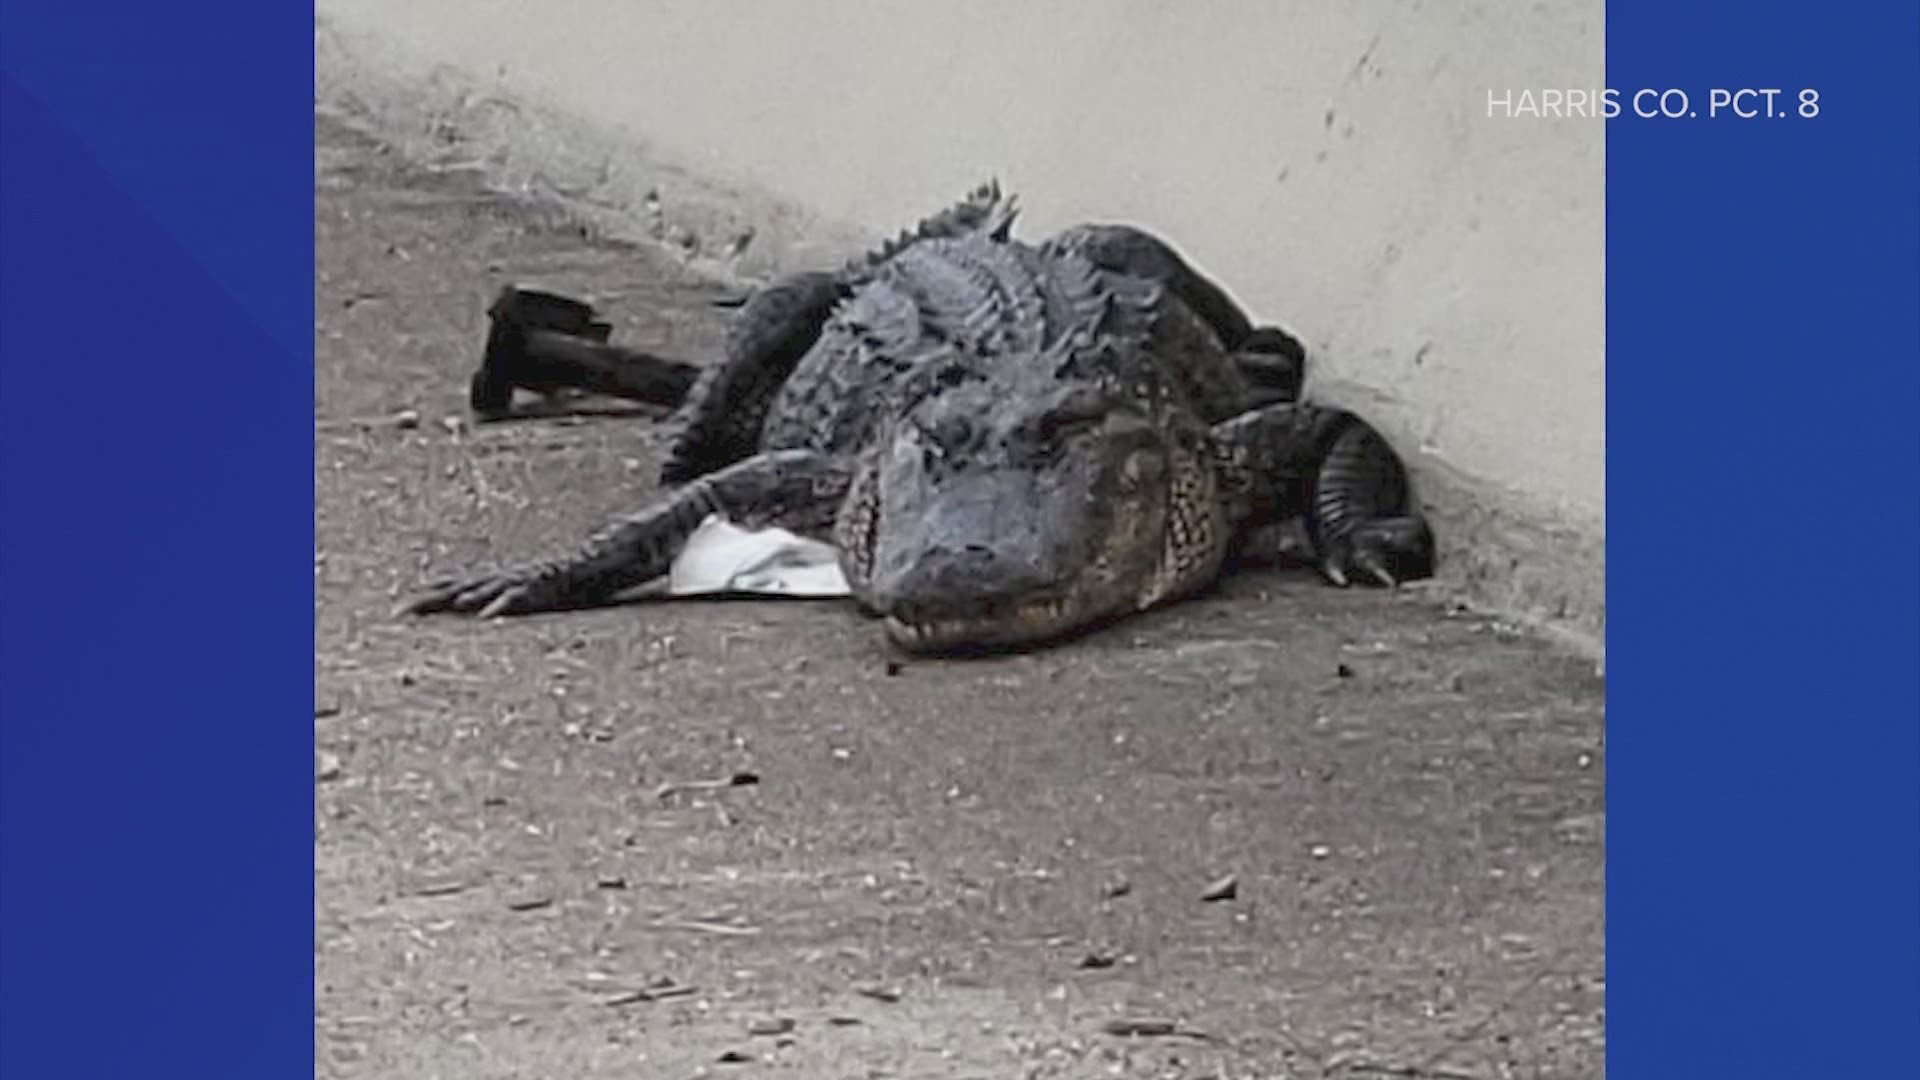 Two animals caused some traffic delays in Houston on Wednesday: a cow on I-10 and a gator on the Fred Hartman Bridge.